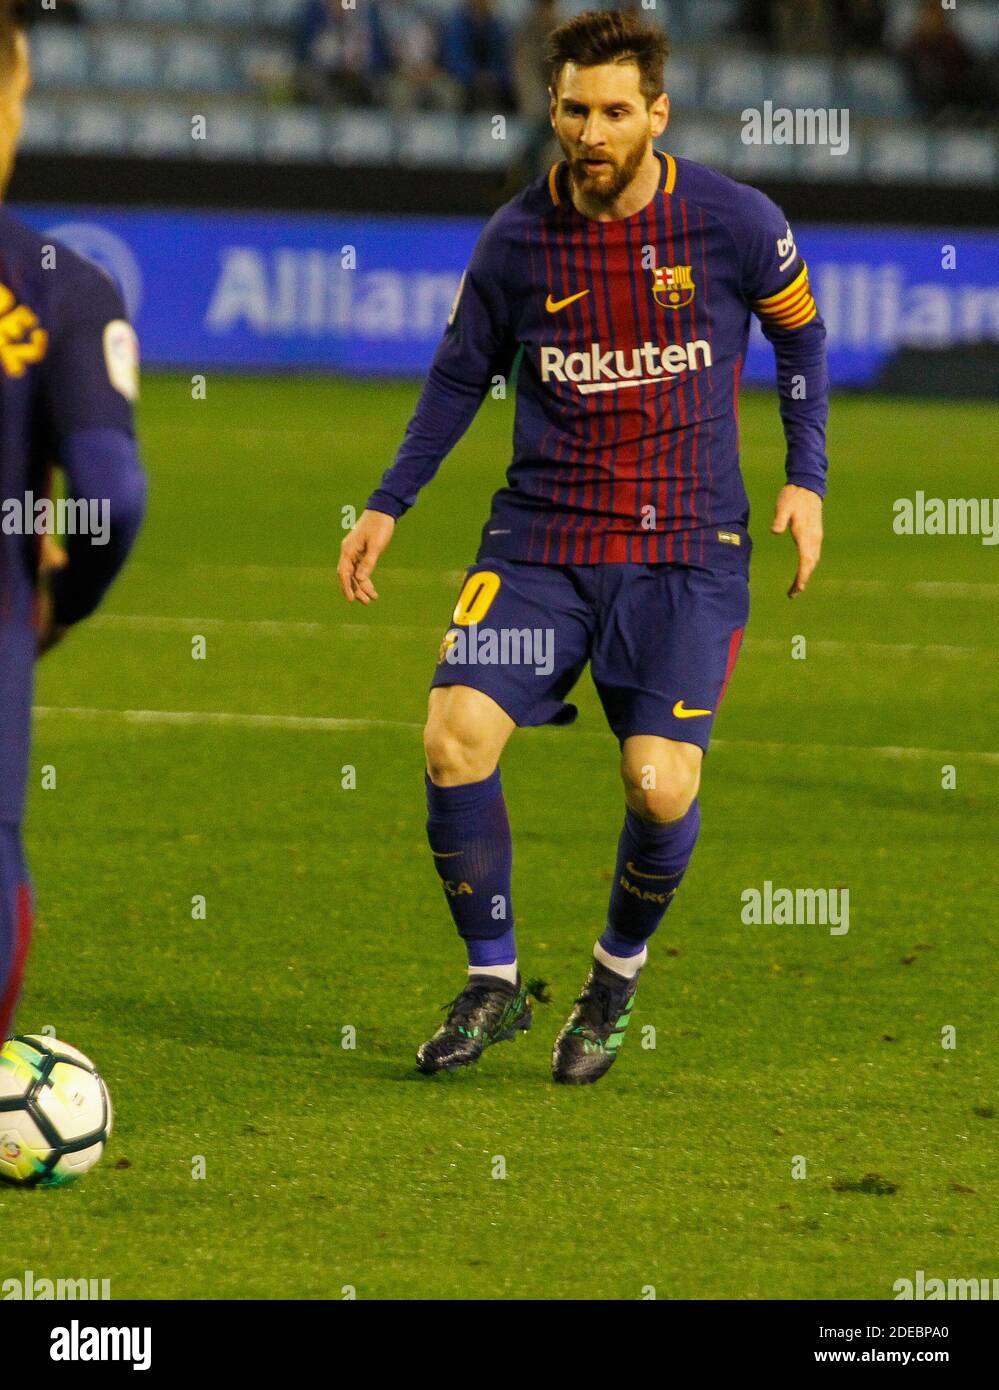 Leo Messi, player of the Barcelona football club with a ball during a match on April 17, 2018 Stock Photo